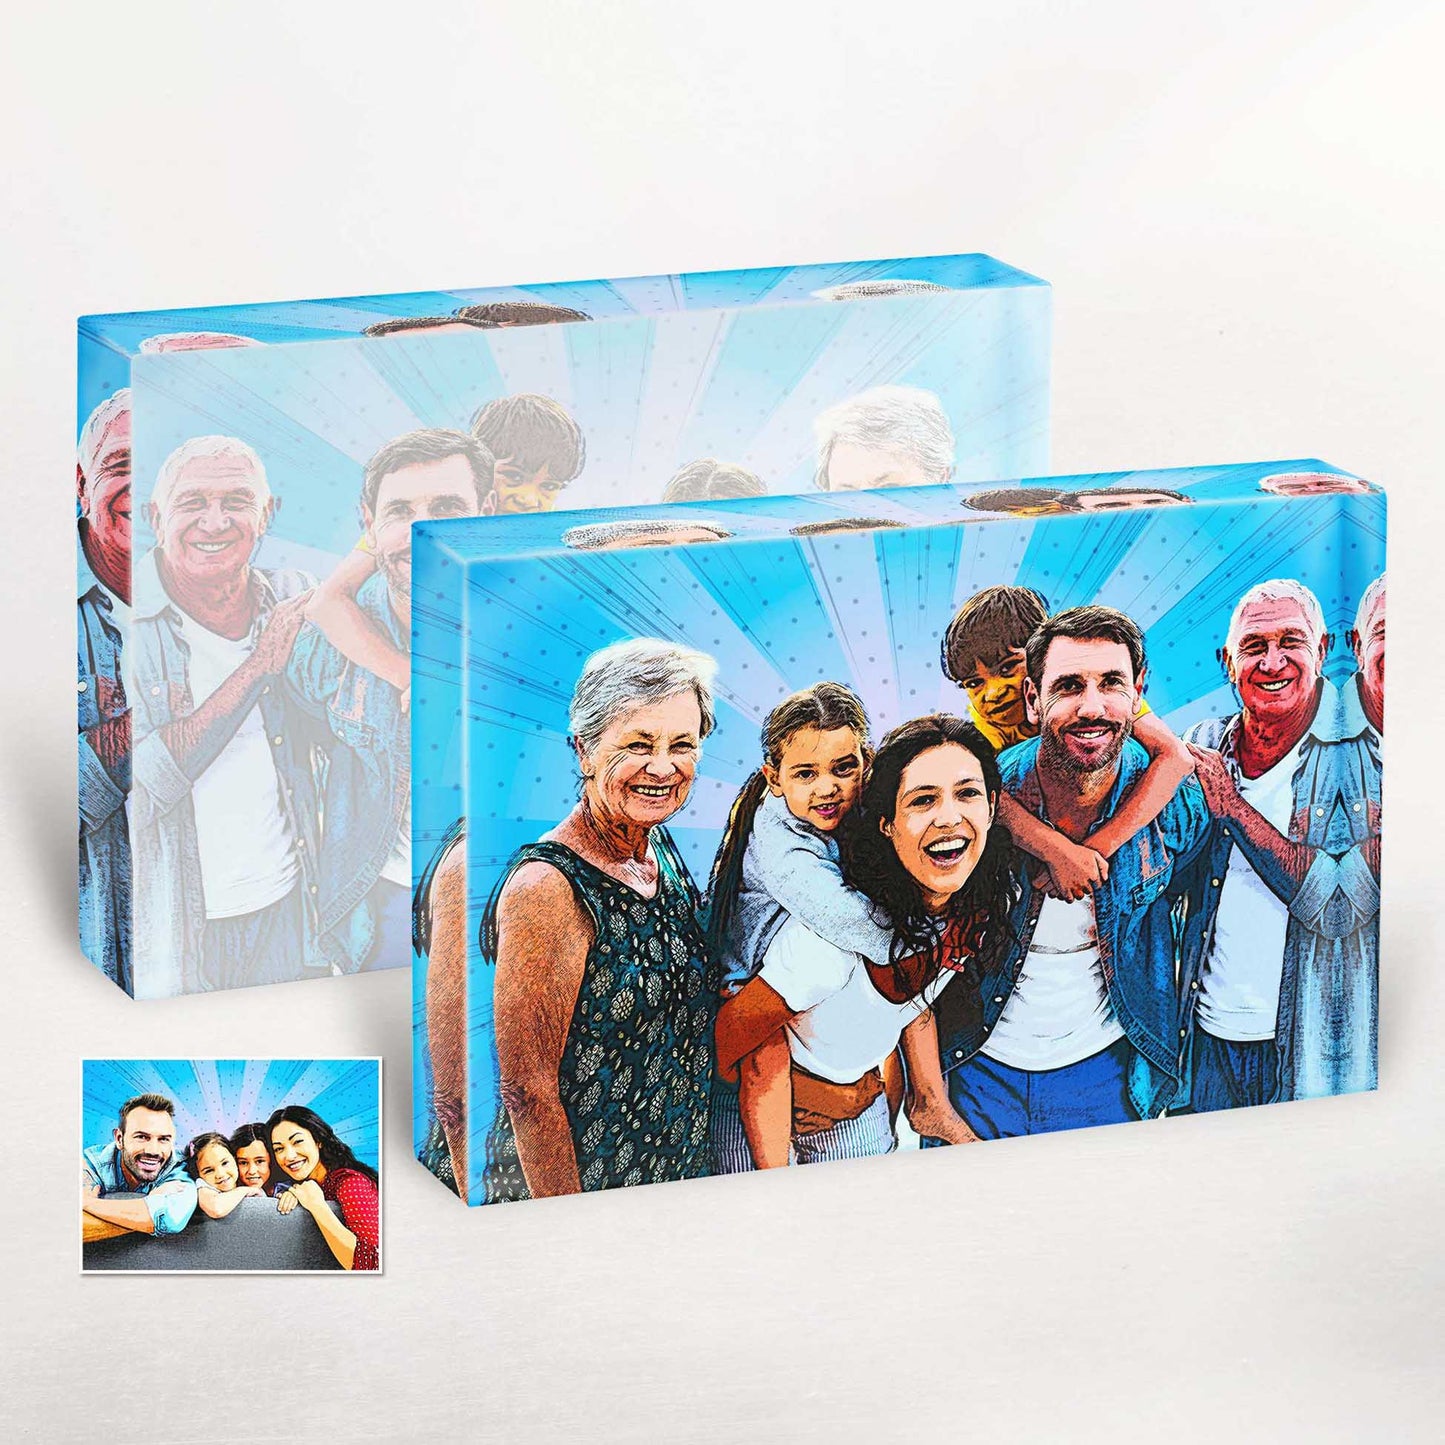 Add a touch of fun and happiness to your home with our Personalised Cartoon Comic Acrylic Block Photo. This fresh and original artwork is sure to brighten up your space, creating a joyful and inviting ambiance.